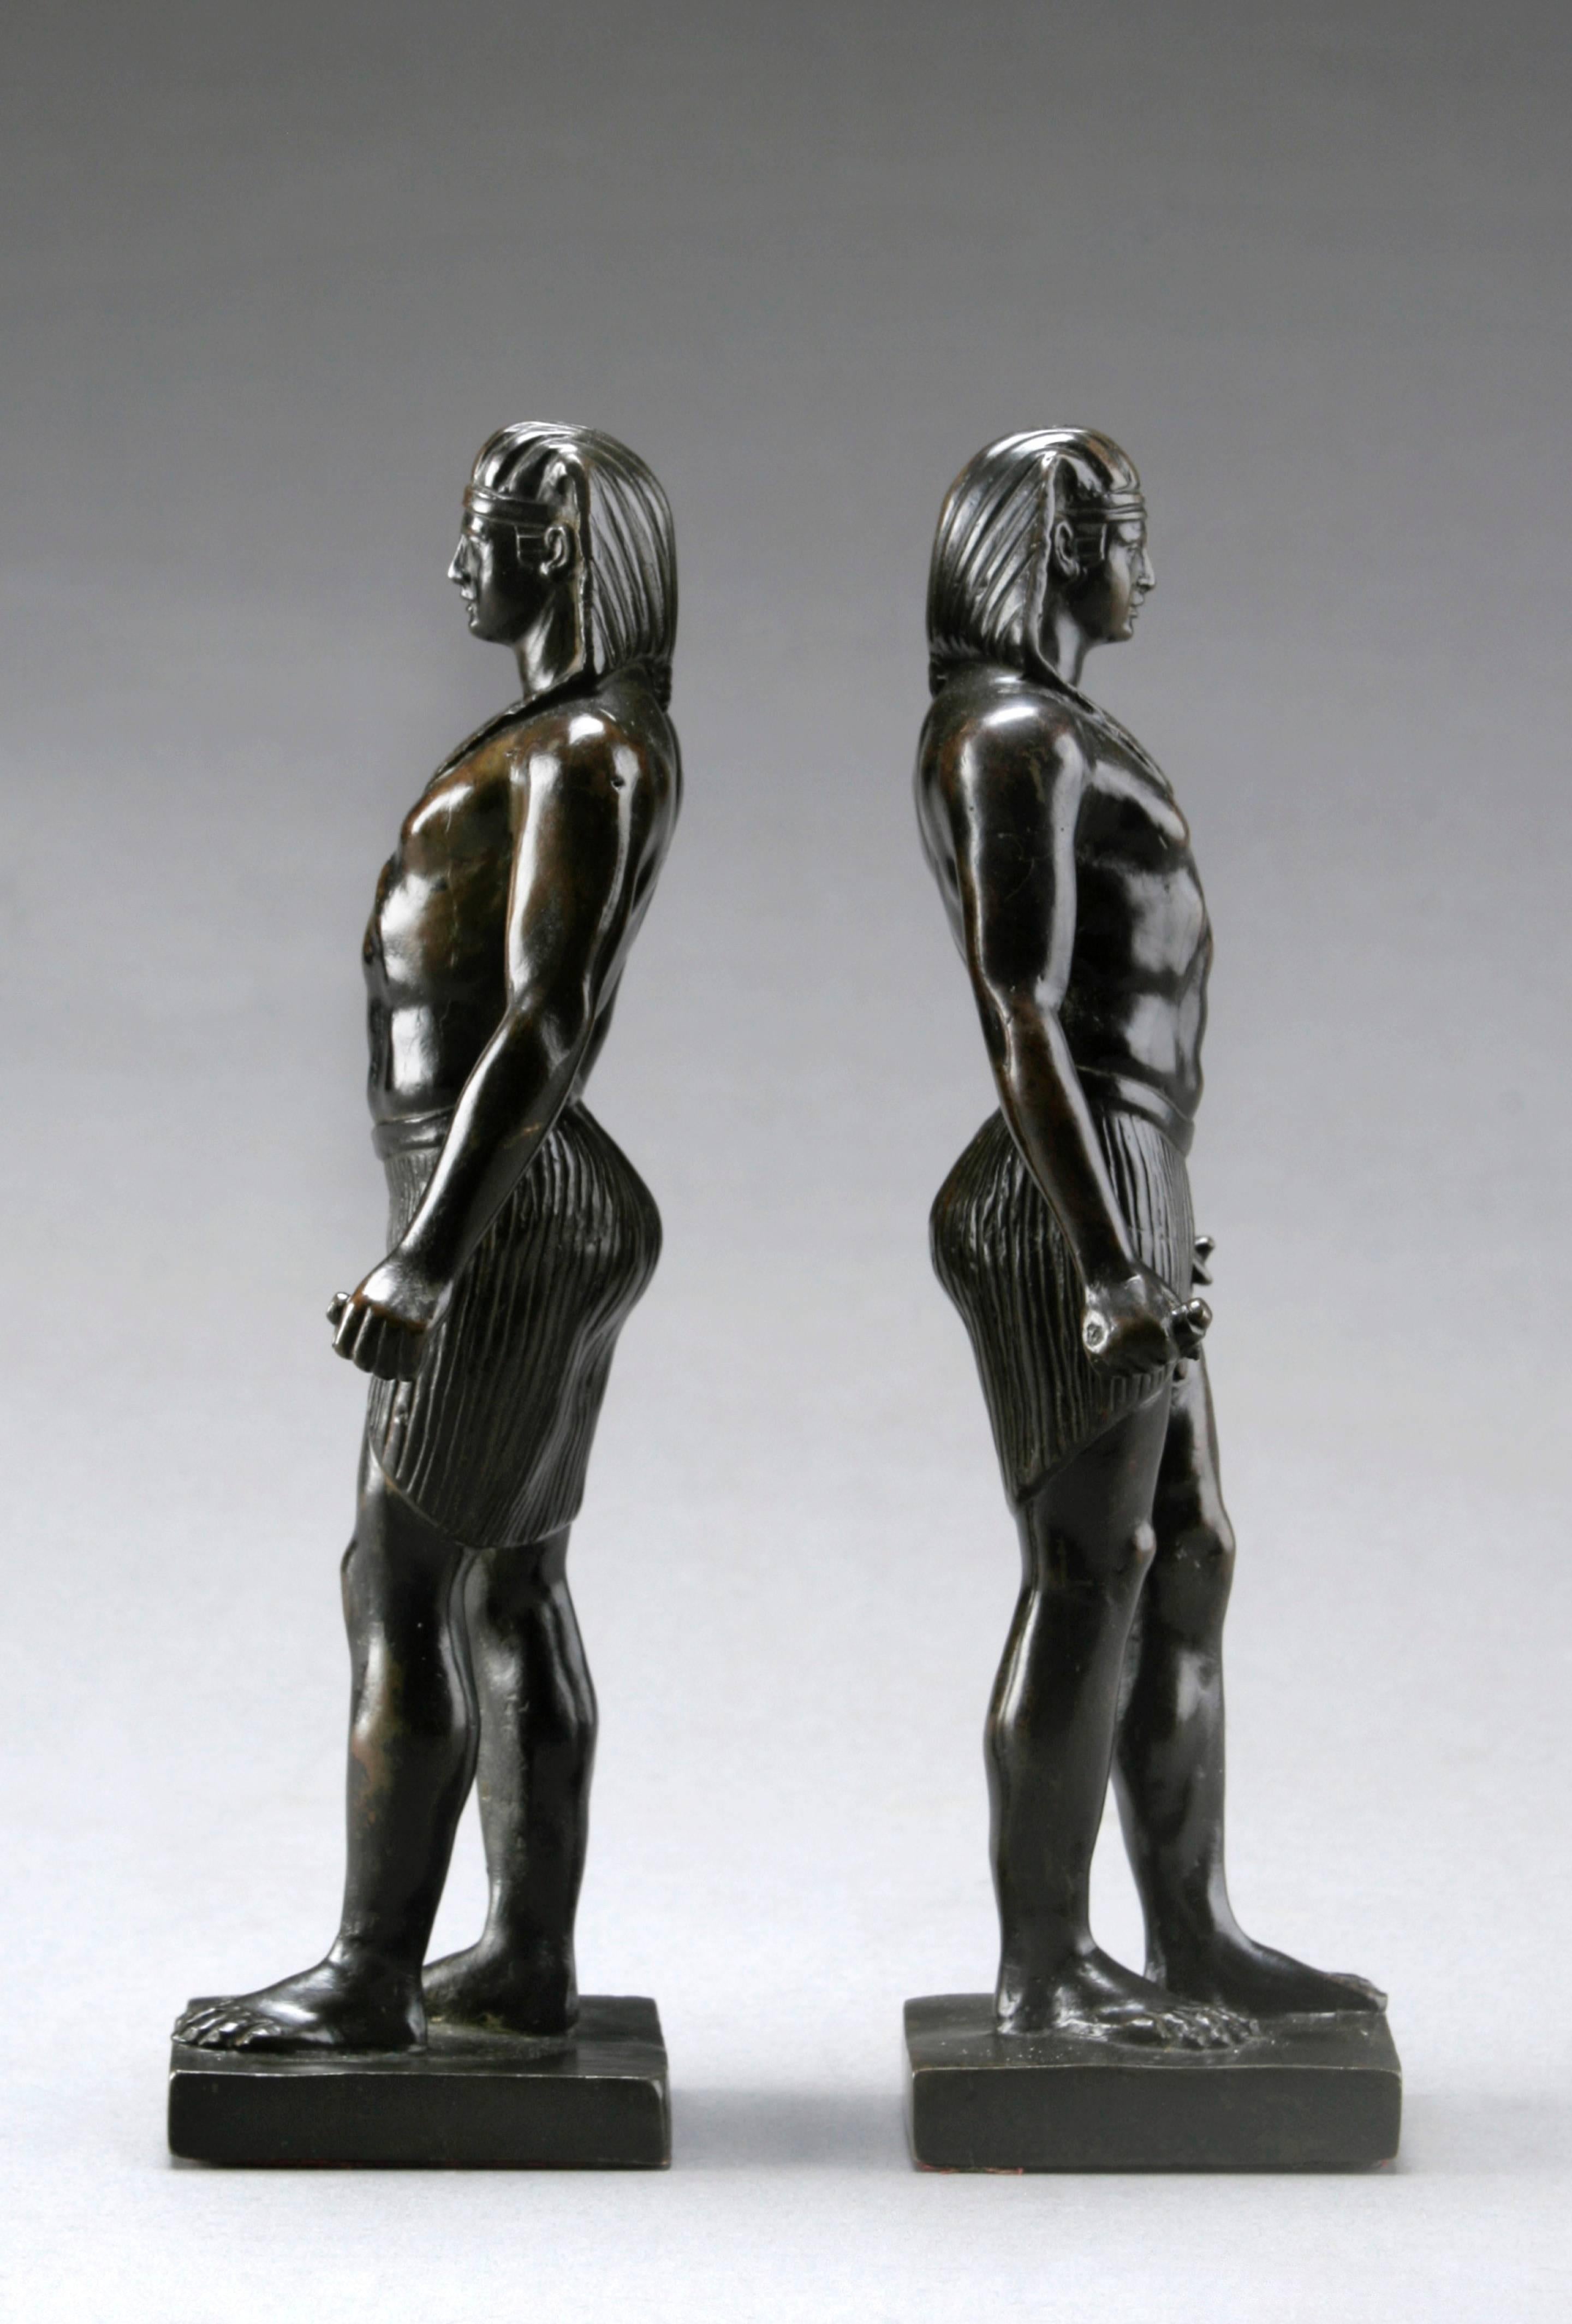 Pair of Patinated Bronze Small Statues of Antinous
Very good period sculptures with a beautiful patina; a brilliant rendition of this ancient sculpture type.  Each figure with Egyptian headdress and shenti, the outstretched hands grasping rods, the